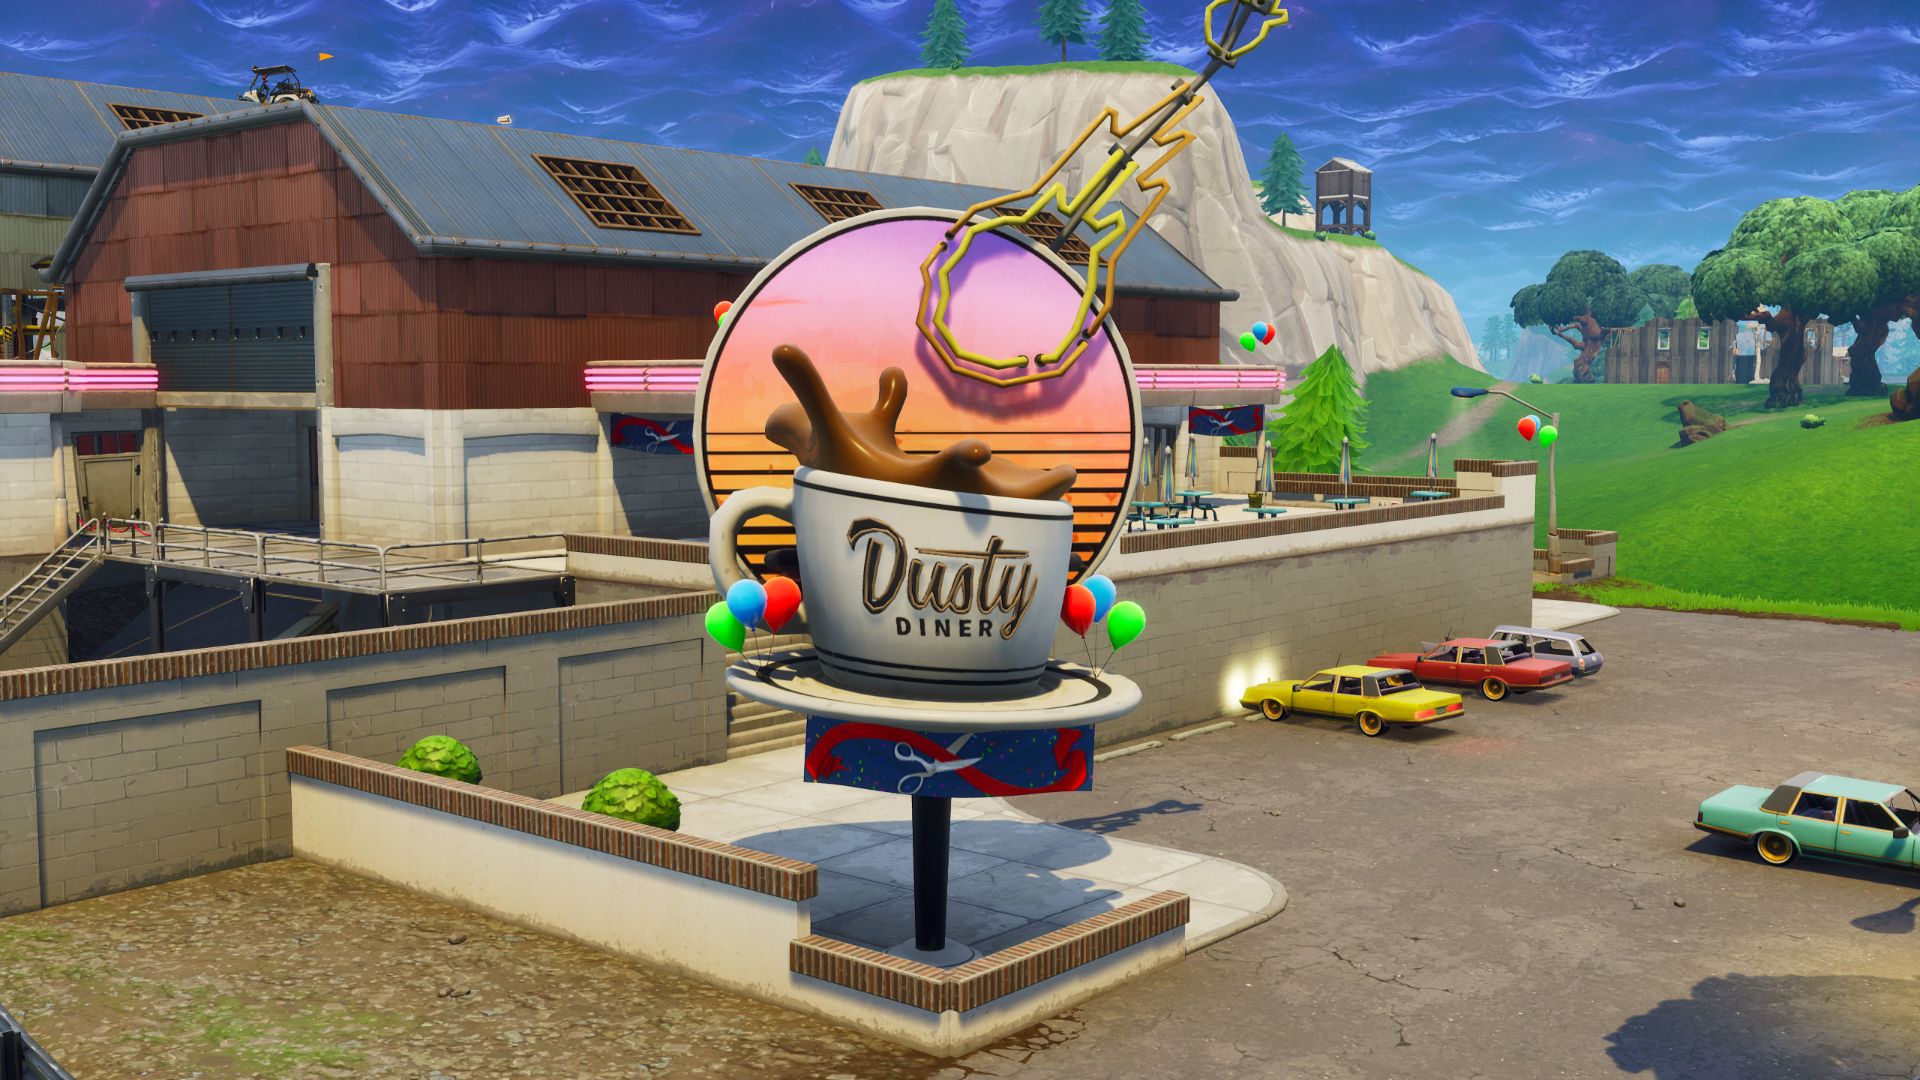 Dusty Diner has just arrived in Fortnite | PCGamesN - 1920 x 1080 jpeg 330kB